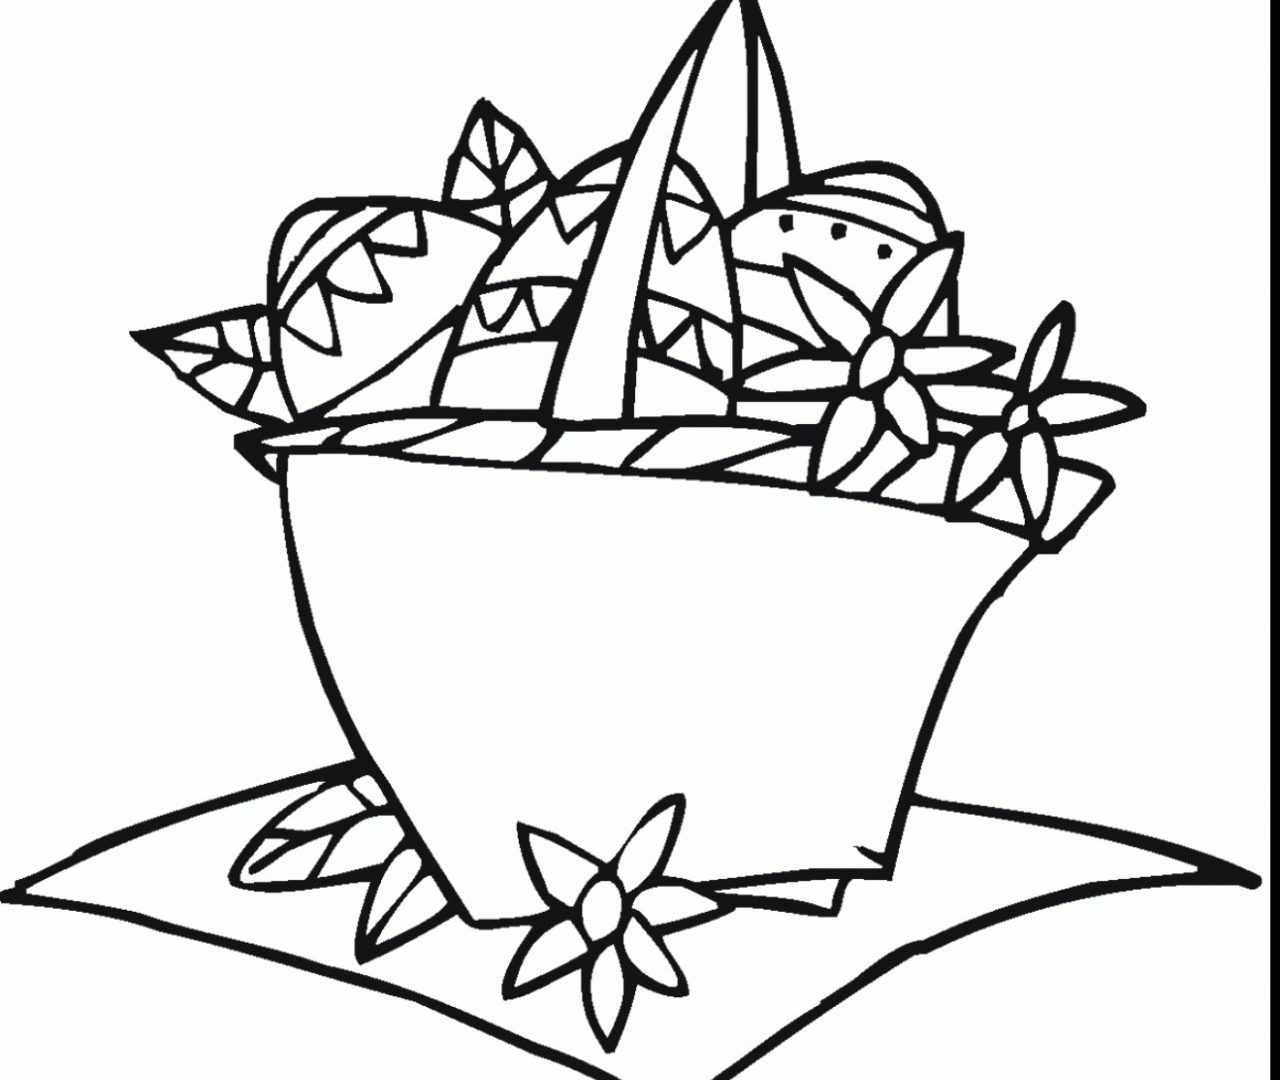 Make Your Own Coloring Pages For Free at GetColoringscom